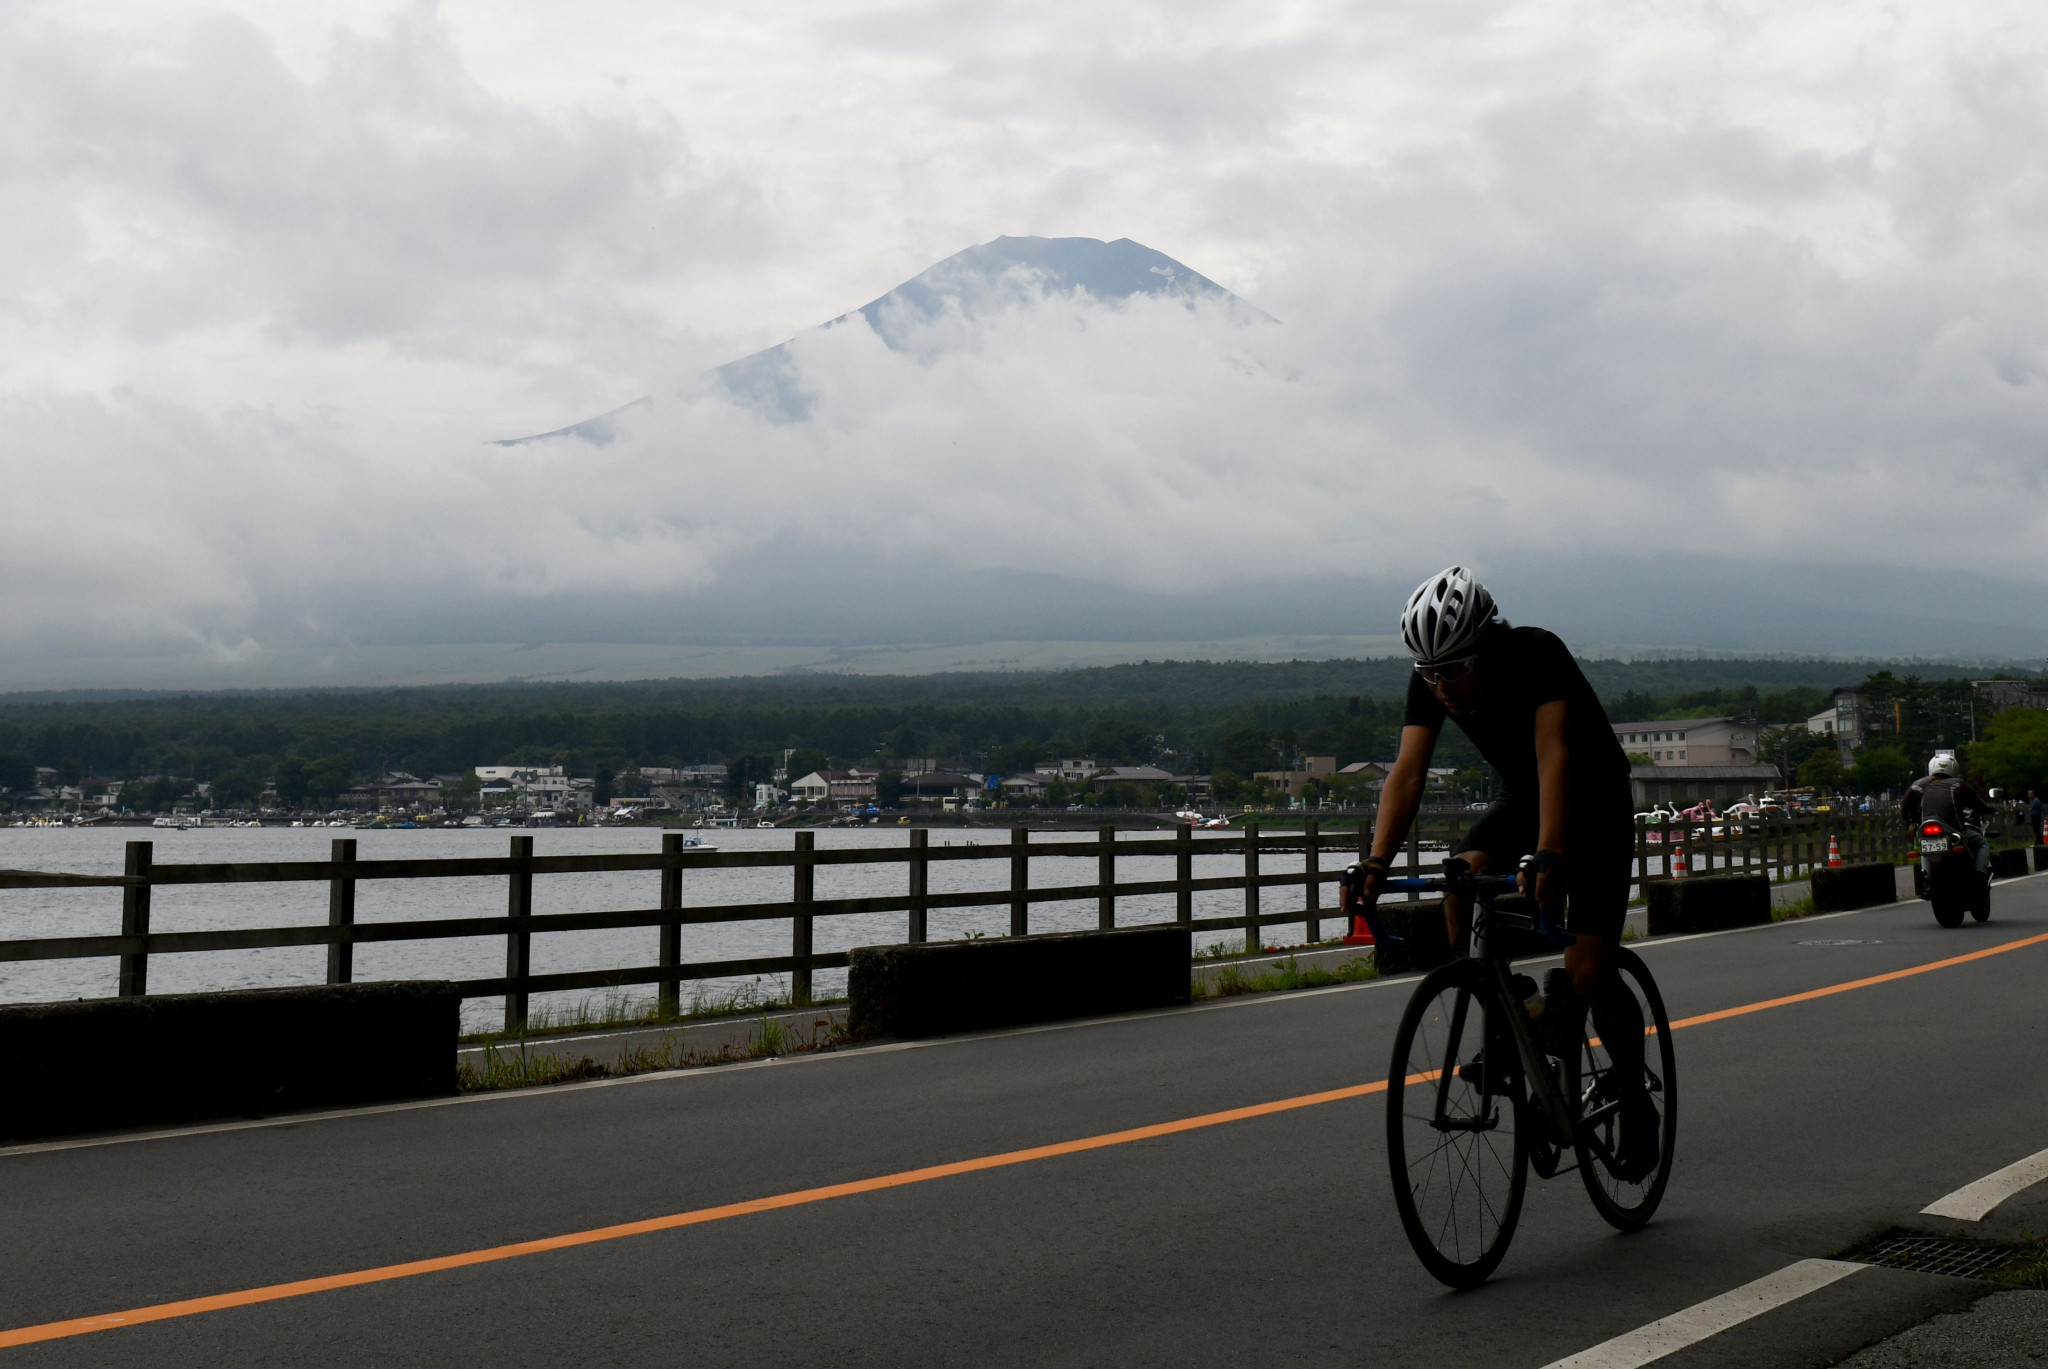 The hilly route could dissuade sprinters from contesting the men's road race at tokyo 2020 ©Getty Images